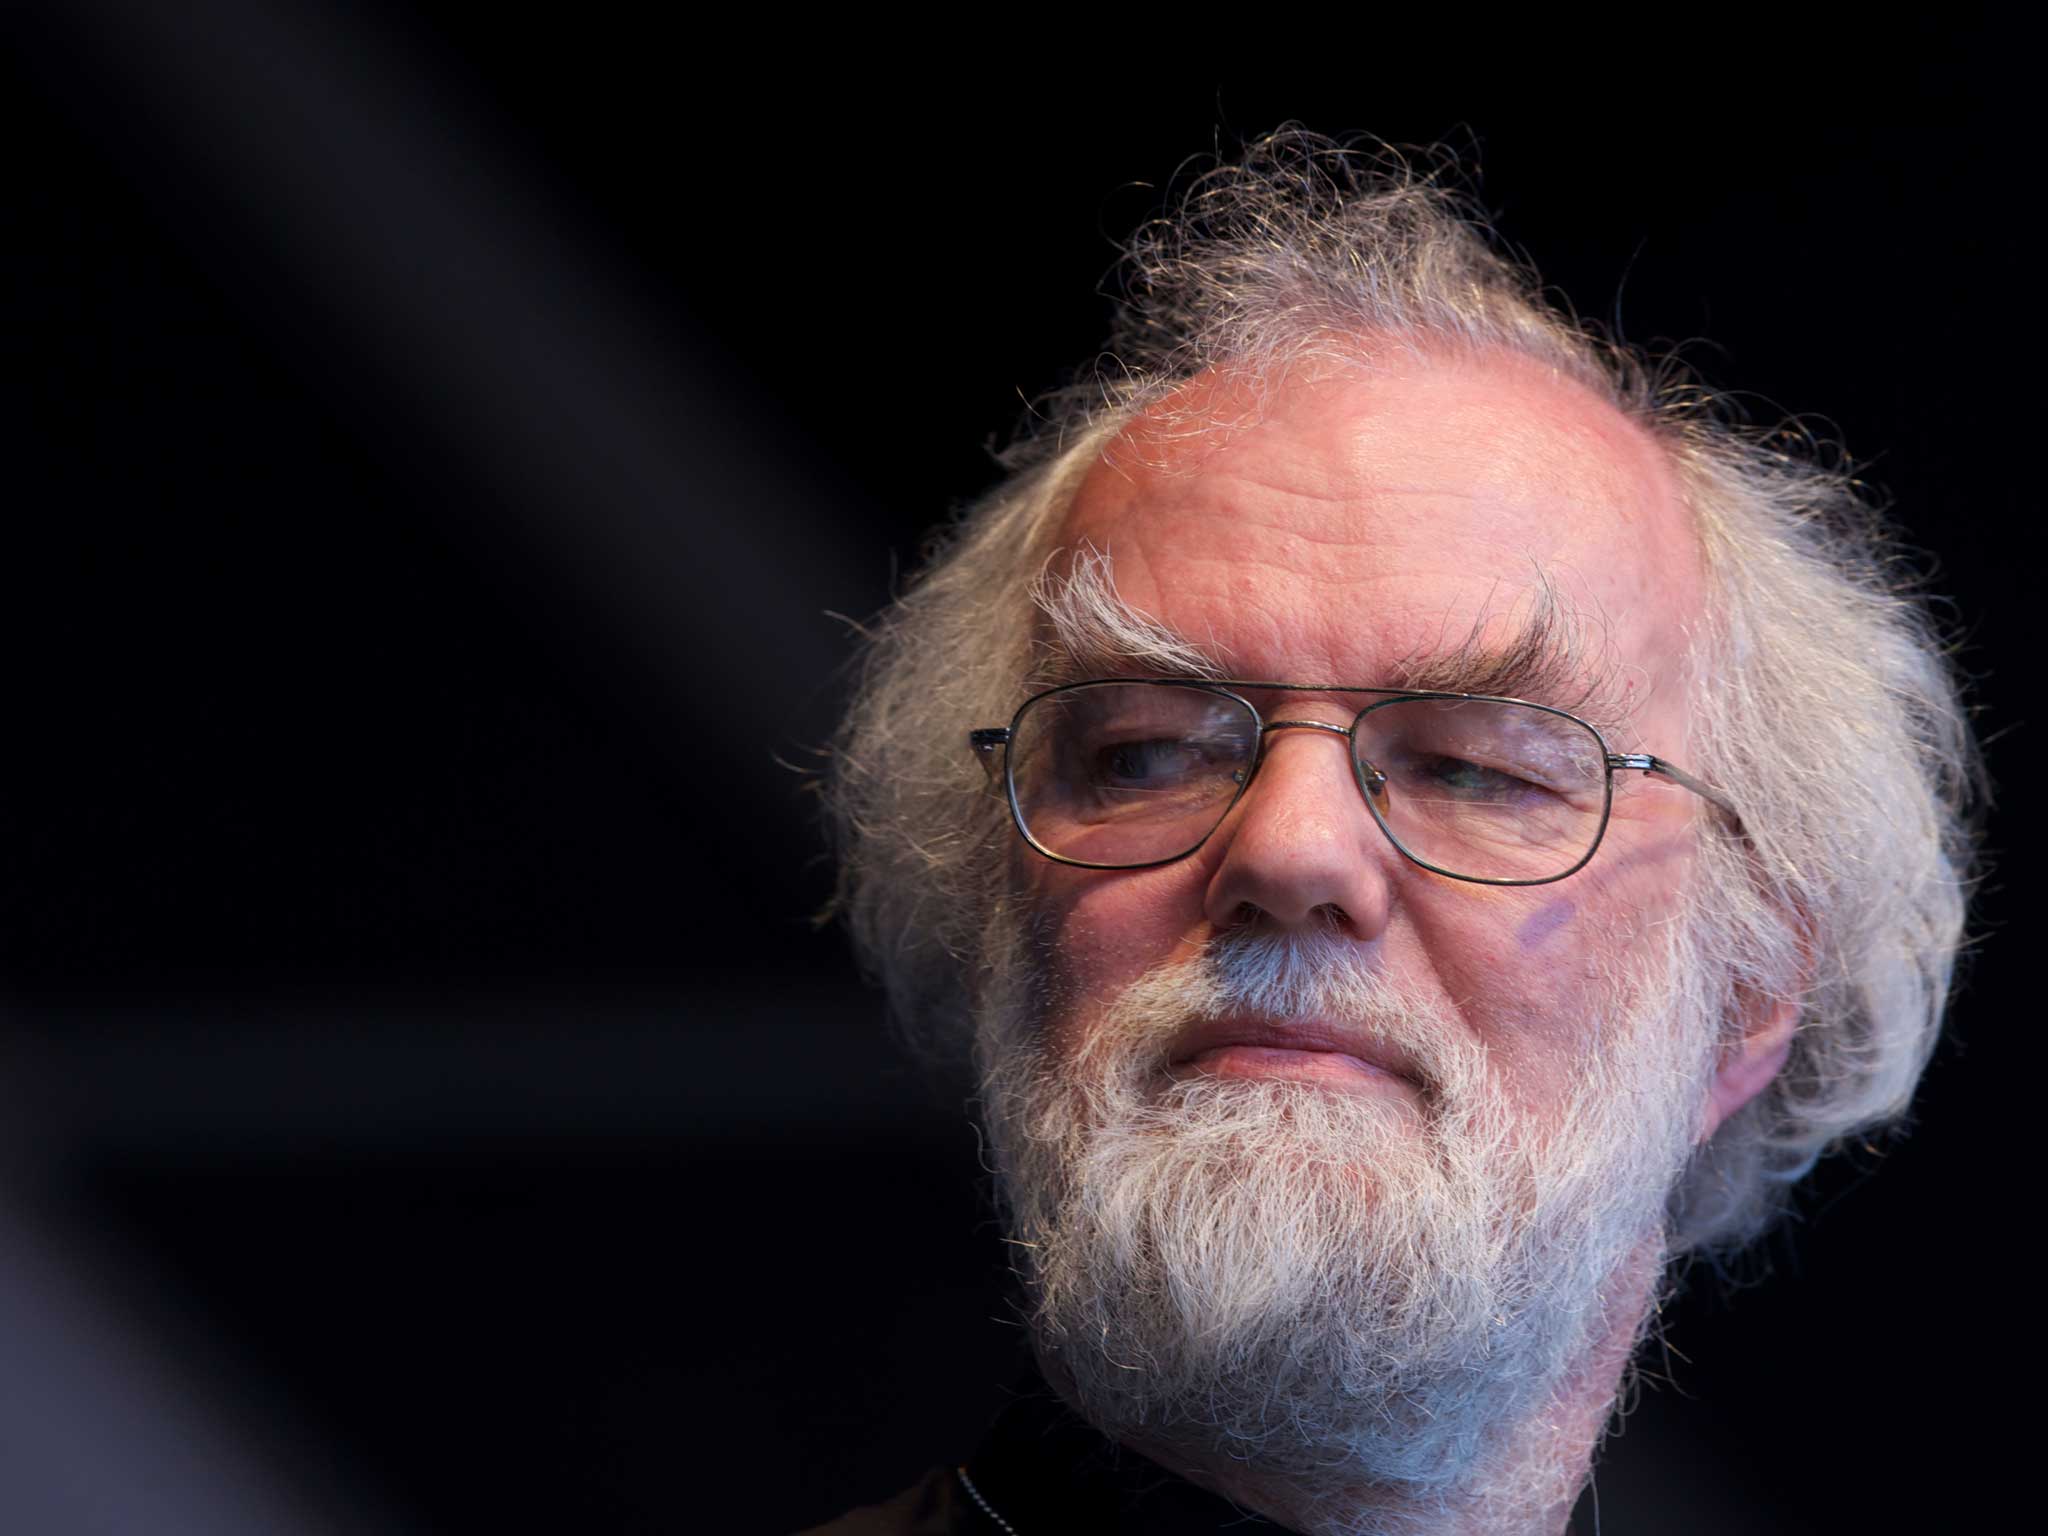 Dr Rowan Williams has called for greater international debt cancellation